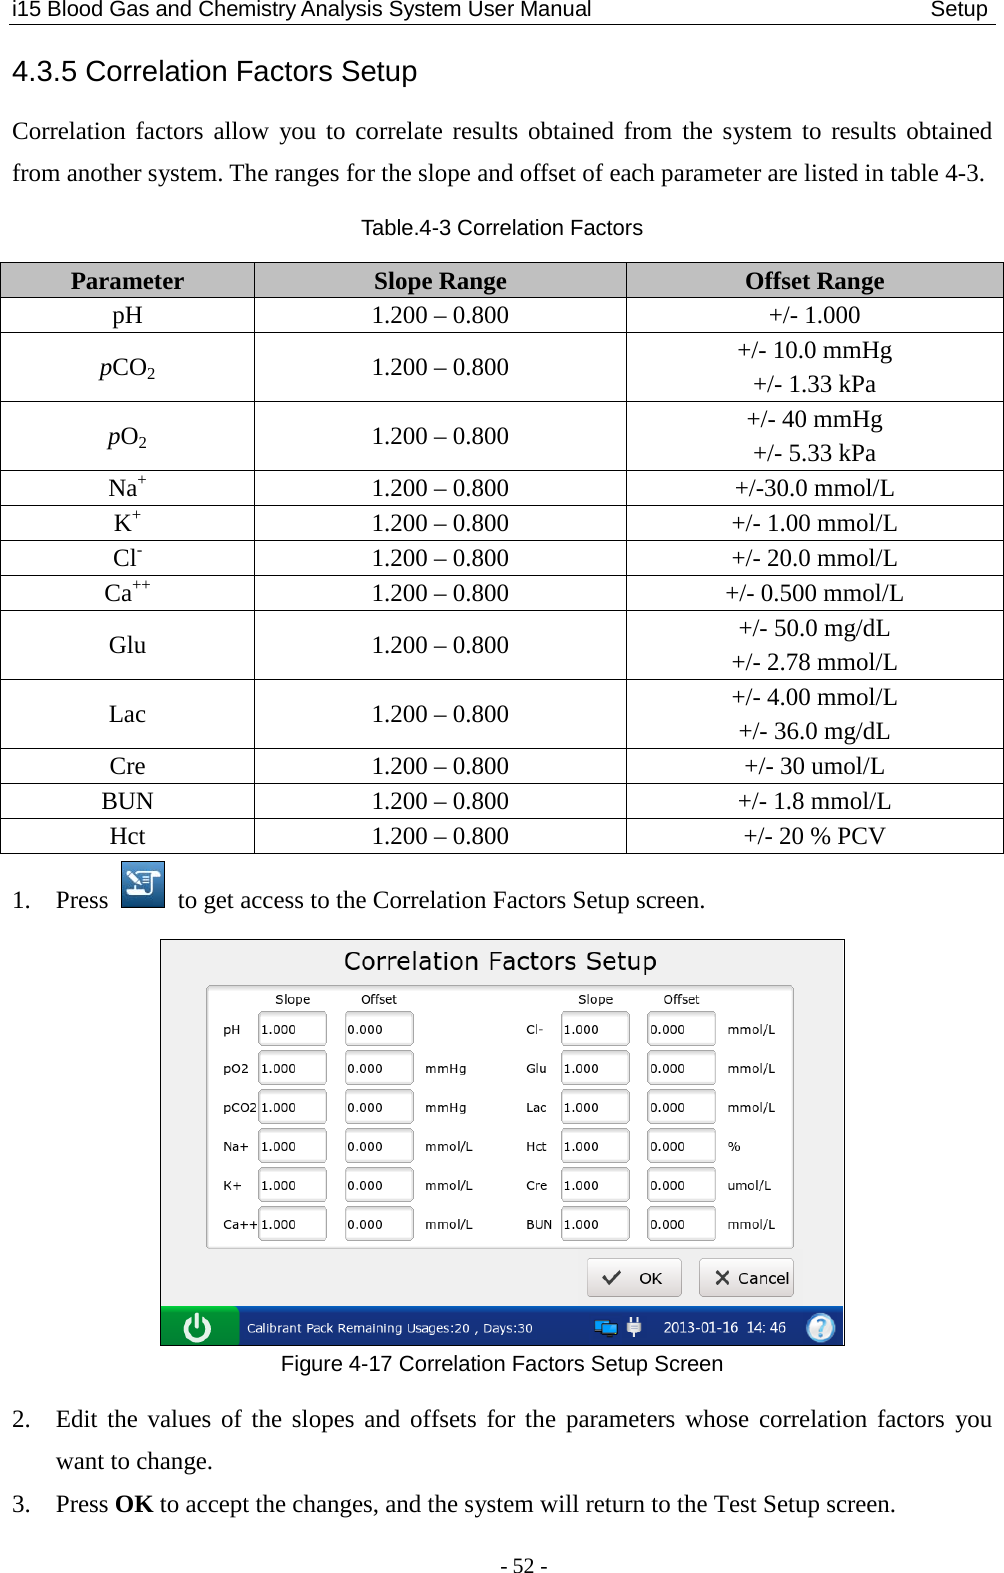 i15 Blood Gas and Chemistry Analysis System User Manual                               Setup - 52 - 4.3.5 Correlation Factors Setup Correlation factors allow you to correlate results obtained from the system to results obtained from another system. The ranges for the slope and offset of each parameter are listed in table 4-3. Table.4-3 Correlation Factors Parameter  Slope Range  Offset Range pH  1.200 – 0.800  +/- 1.000 pCO2  1.200 – 0.800  +/- 10.0 mmHg +/- 1.33 kPa pO2  1.200 – 0.800  +/- 40 mmHg +/- 5.33 kPa Na+  1.200 – 0.800  +/-30.0 mmol/L K+  1.200 – 0.800  +/- 1.00 mmol/L Cl-  1.200 – 0.800  +/- 20.0 mmol/L Ca++  1.200 – 0.800  +/- 0.500 mmol/L Glu  1.200 – 0.800  +/- 50.0 mg/dL +/- 2.78 mmol/L Lac  1.200 – 0.800  +/- 4.00 mmol/L +/- 36.0 mg/dL Cre  1.200 – 0.800  +/- 30 umol/L BUN  1.200 – 0.800  +/- 1.8 mmol/L Hct  1.200 – 0.800  +/- 20 % PCV 1. Press   to get access to the Correlation Factors Setup screen.  Figure 4-17 Correlation Factors Setup Screen 2. Edit the values of the slopes and offsets for the parameters whose correlation factors you want to change. 3. Press OK to accept the changes, and the system will return to the Test Setup screen. 